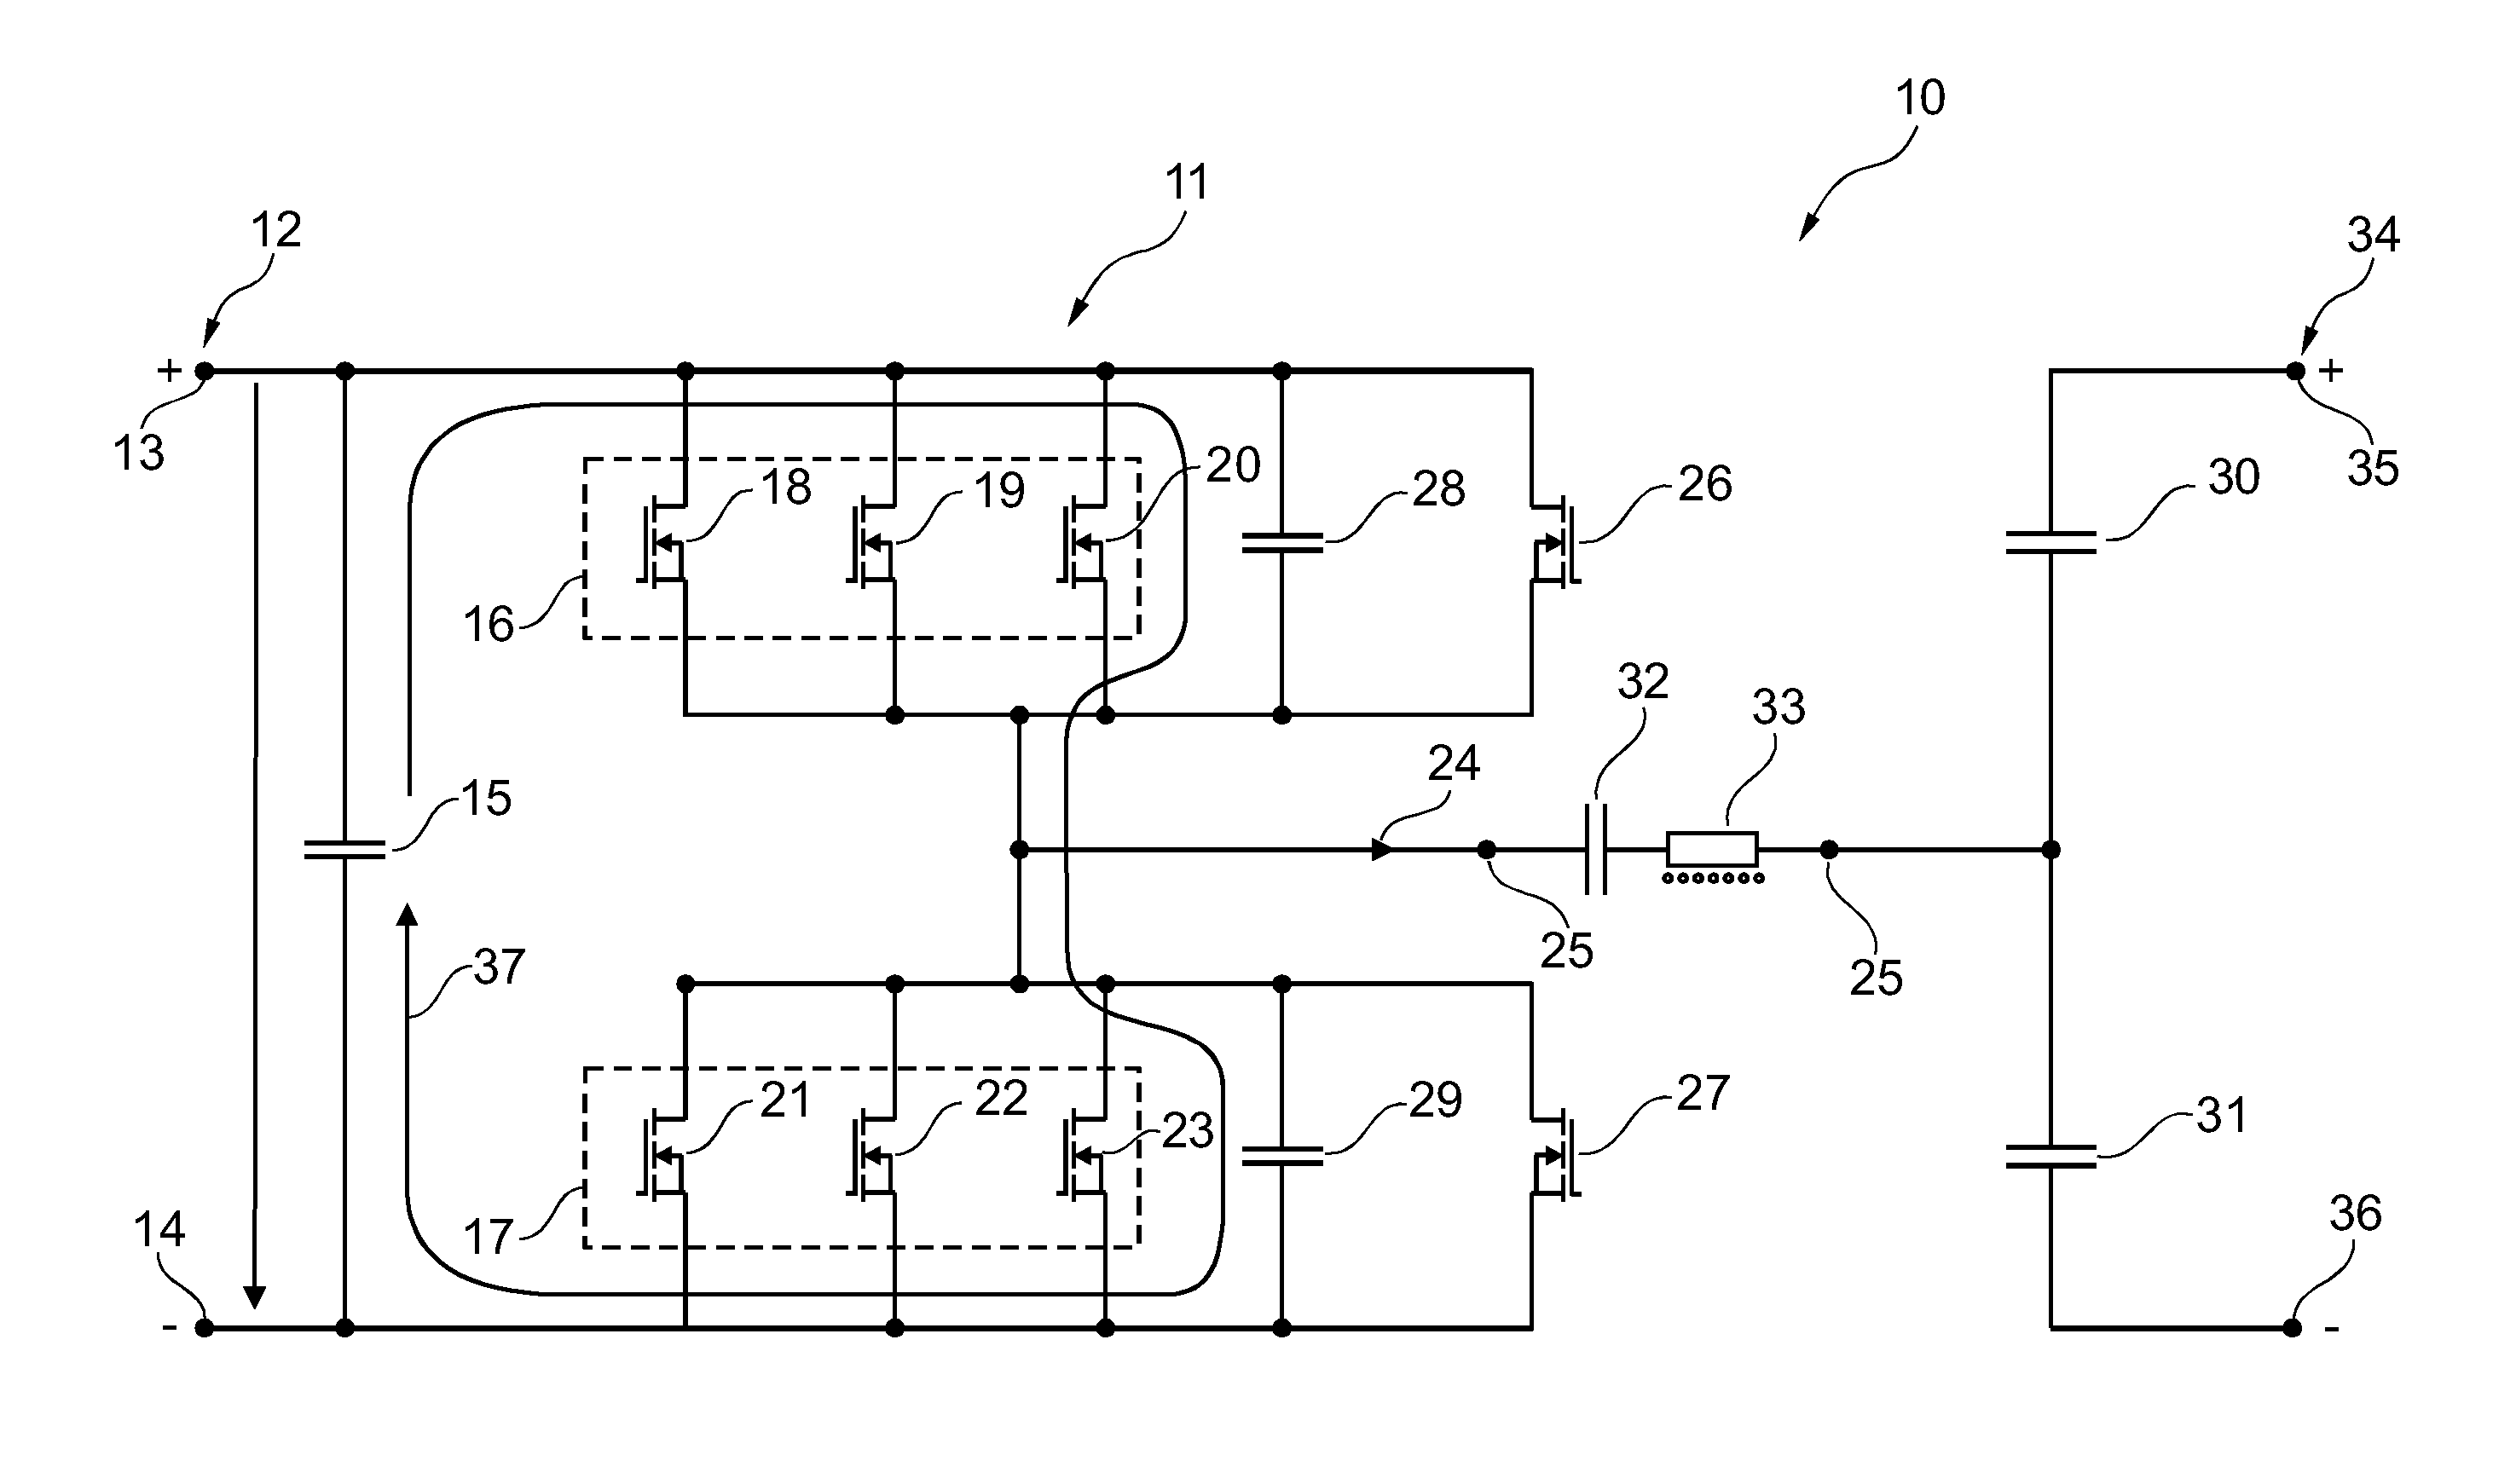 Switching device for an x-ray generator